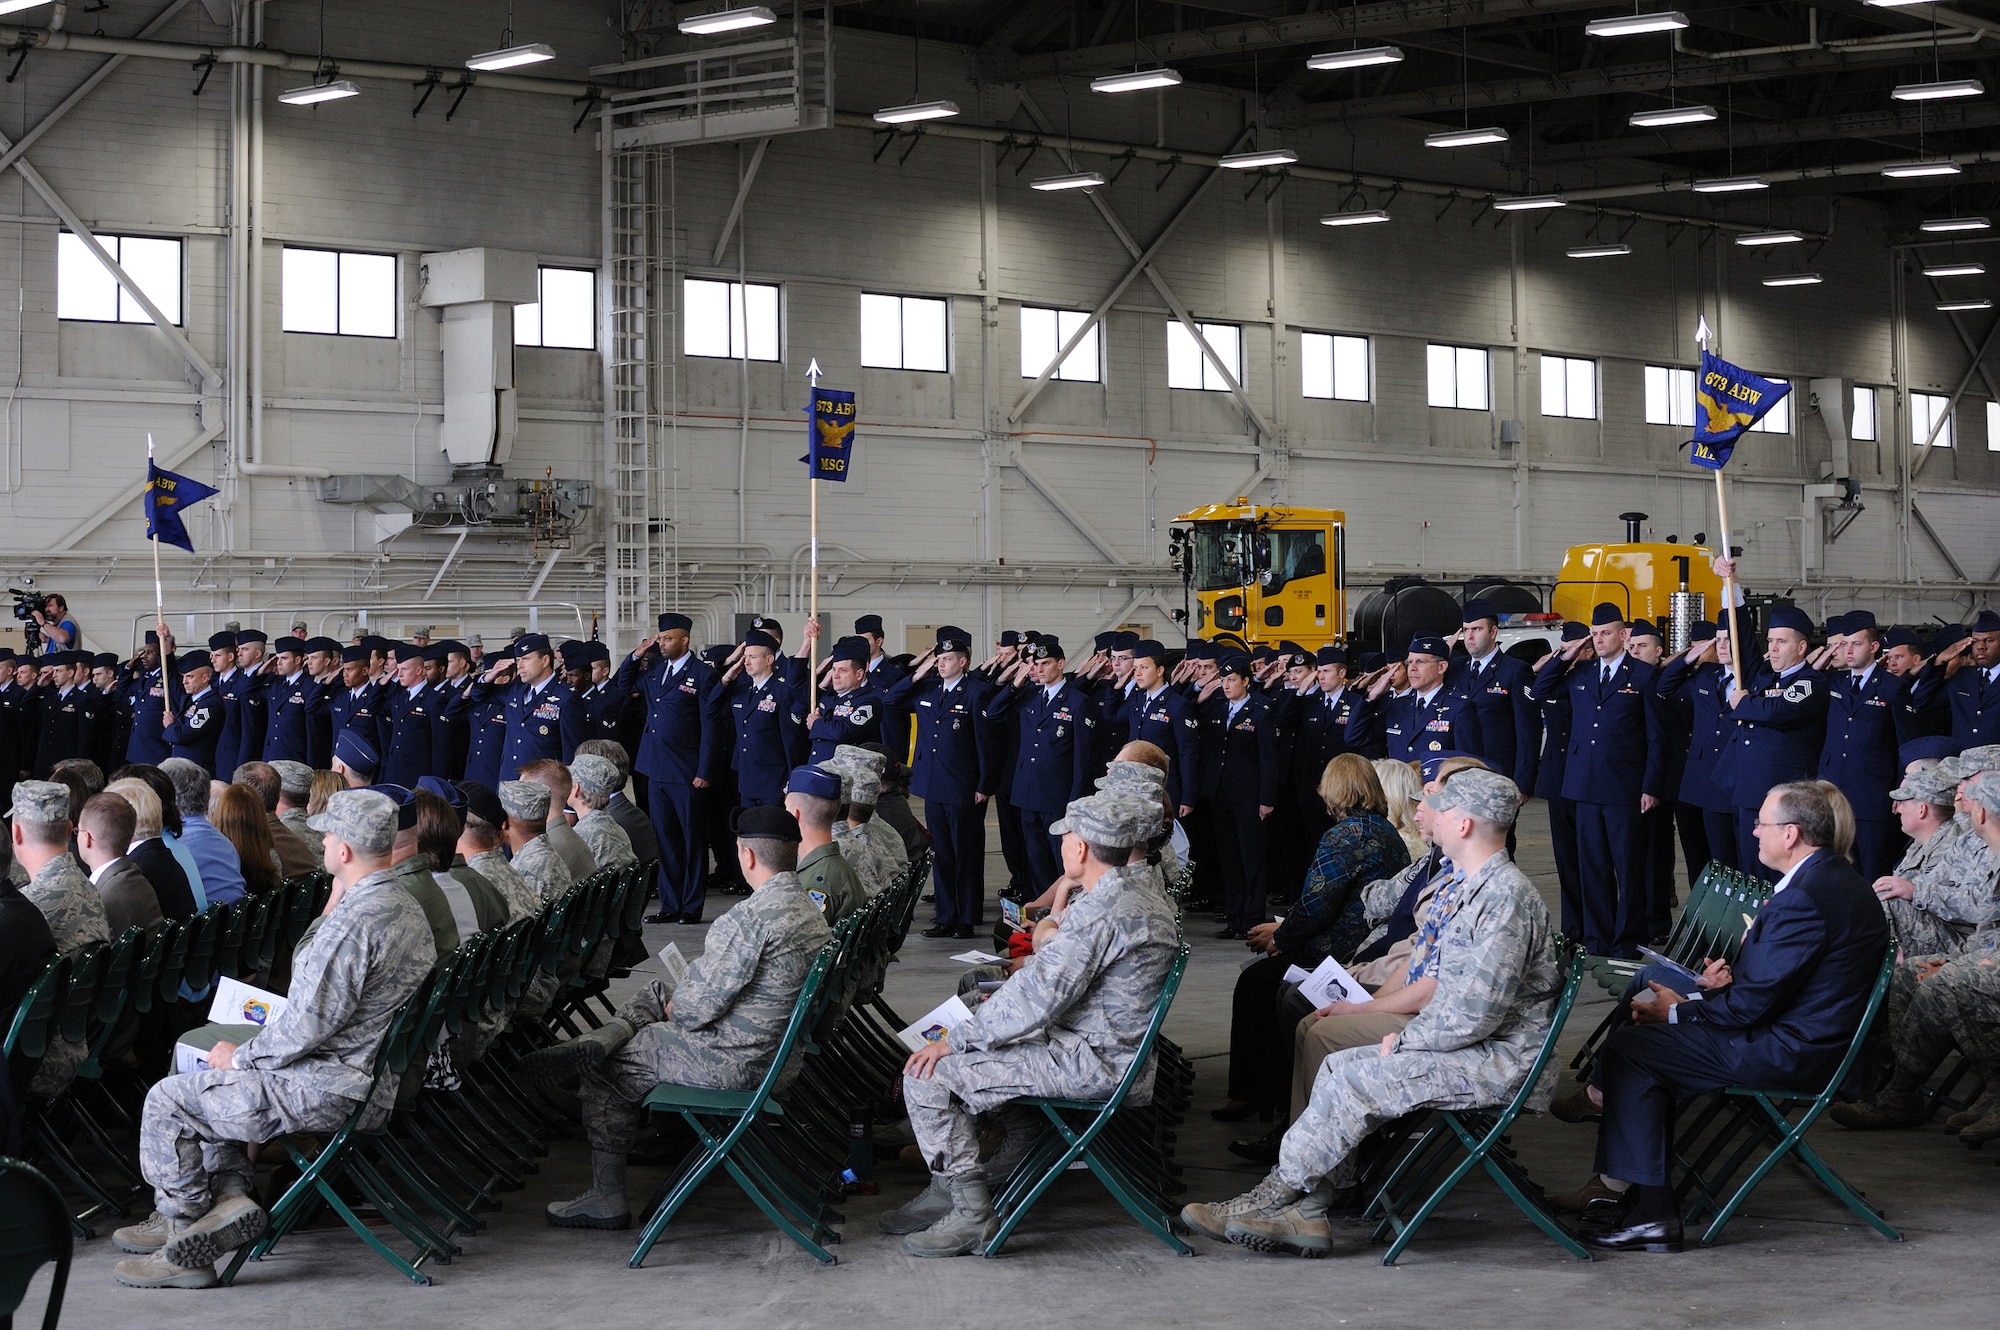 JOINT BASE ELMENDORF-RICHARDSON, Alaska -- Members of the 673d Air Base Wing (673d ABW) render their first salute to the commander during the unit's activation ceremony July 30. The 673d ABW is the supporting unit for Joint Base Elmendorf-Richardson which is comprised of over 6,000 military, civilian and contractors from both Elmendorf Air Force Base and Fort Richardson Army Garrison near Anchorage, Alaska. (Air Force photo by Master Sgt. Jeremiah Erickson)